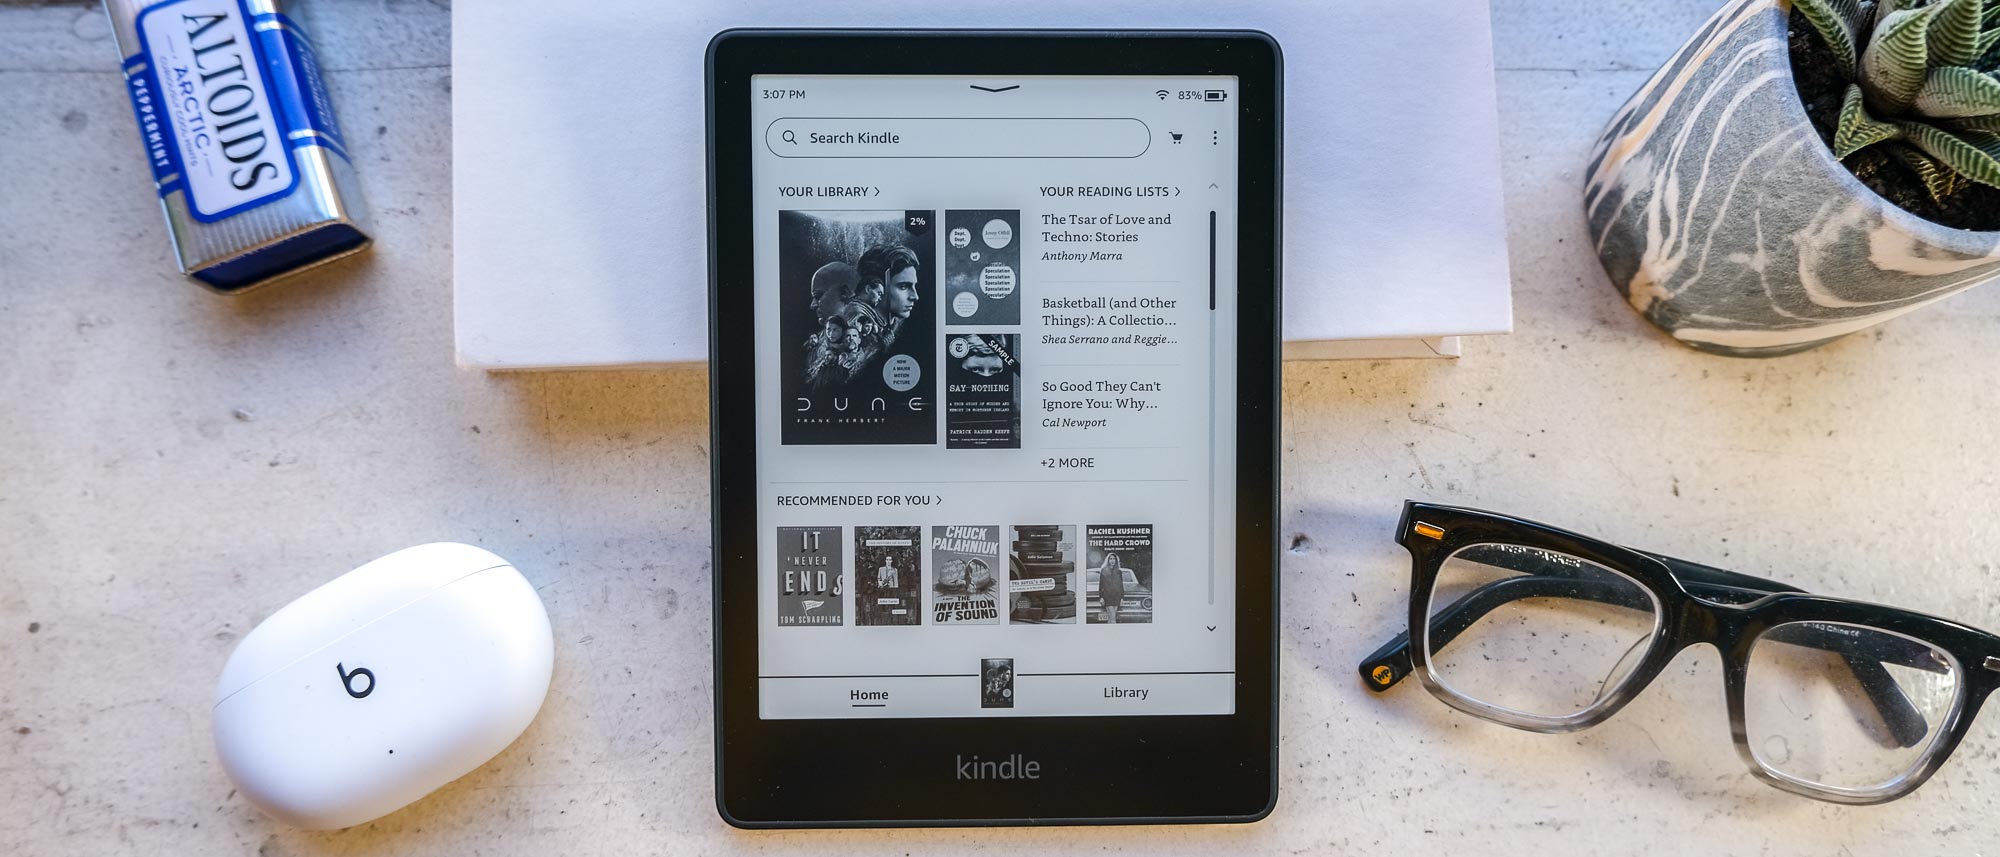 Kindle Paperwhite E-Reader (With Offers) - 6 - 8GB - Black 2018 